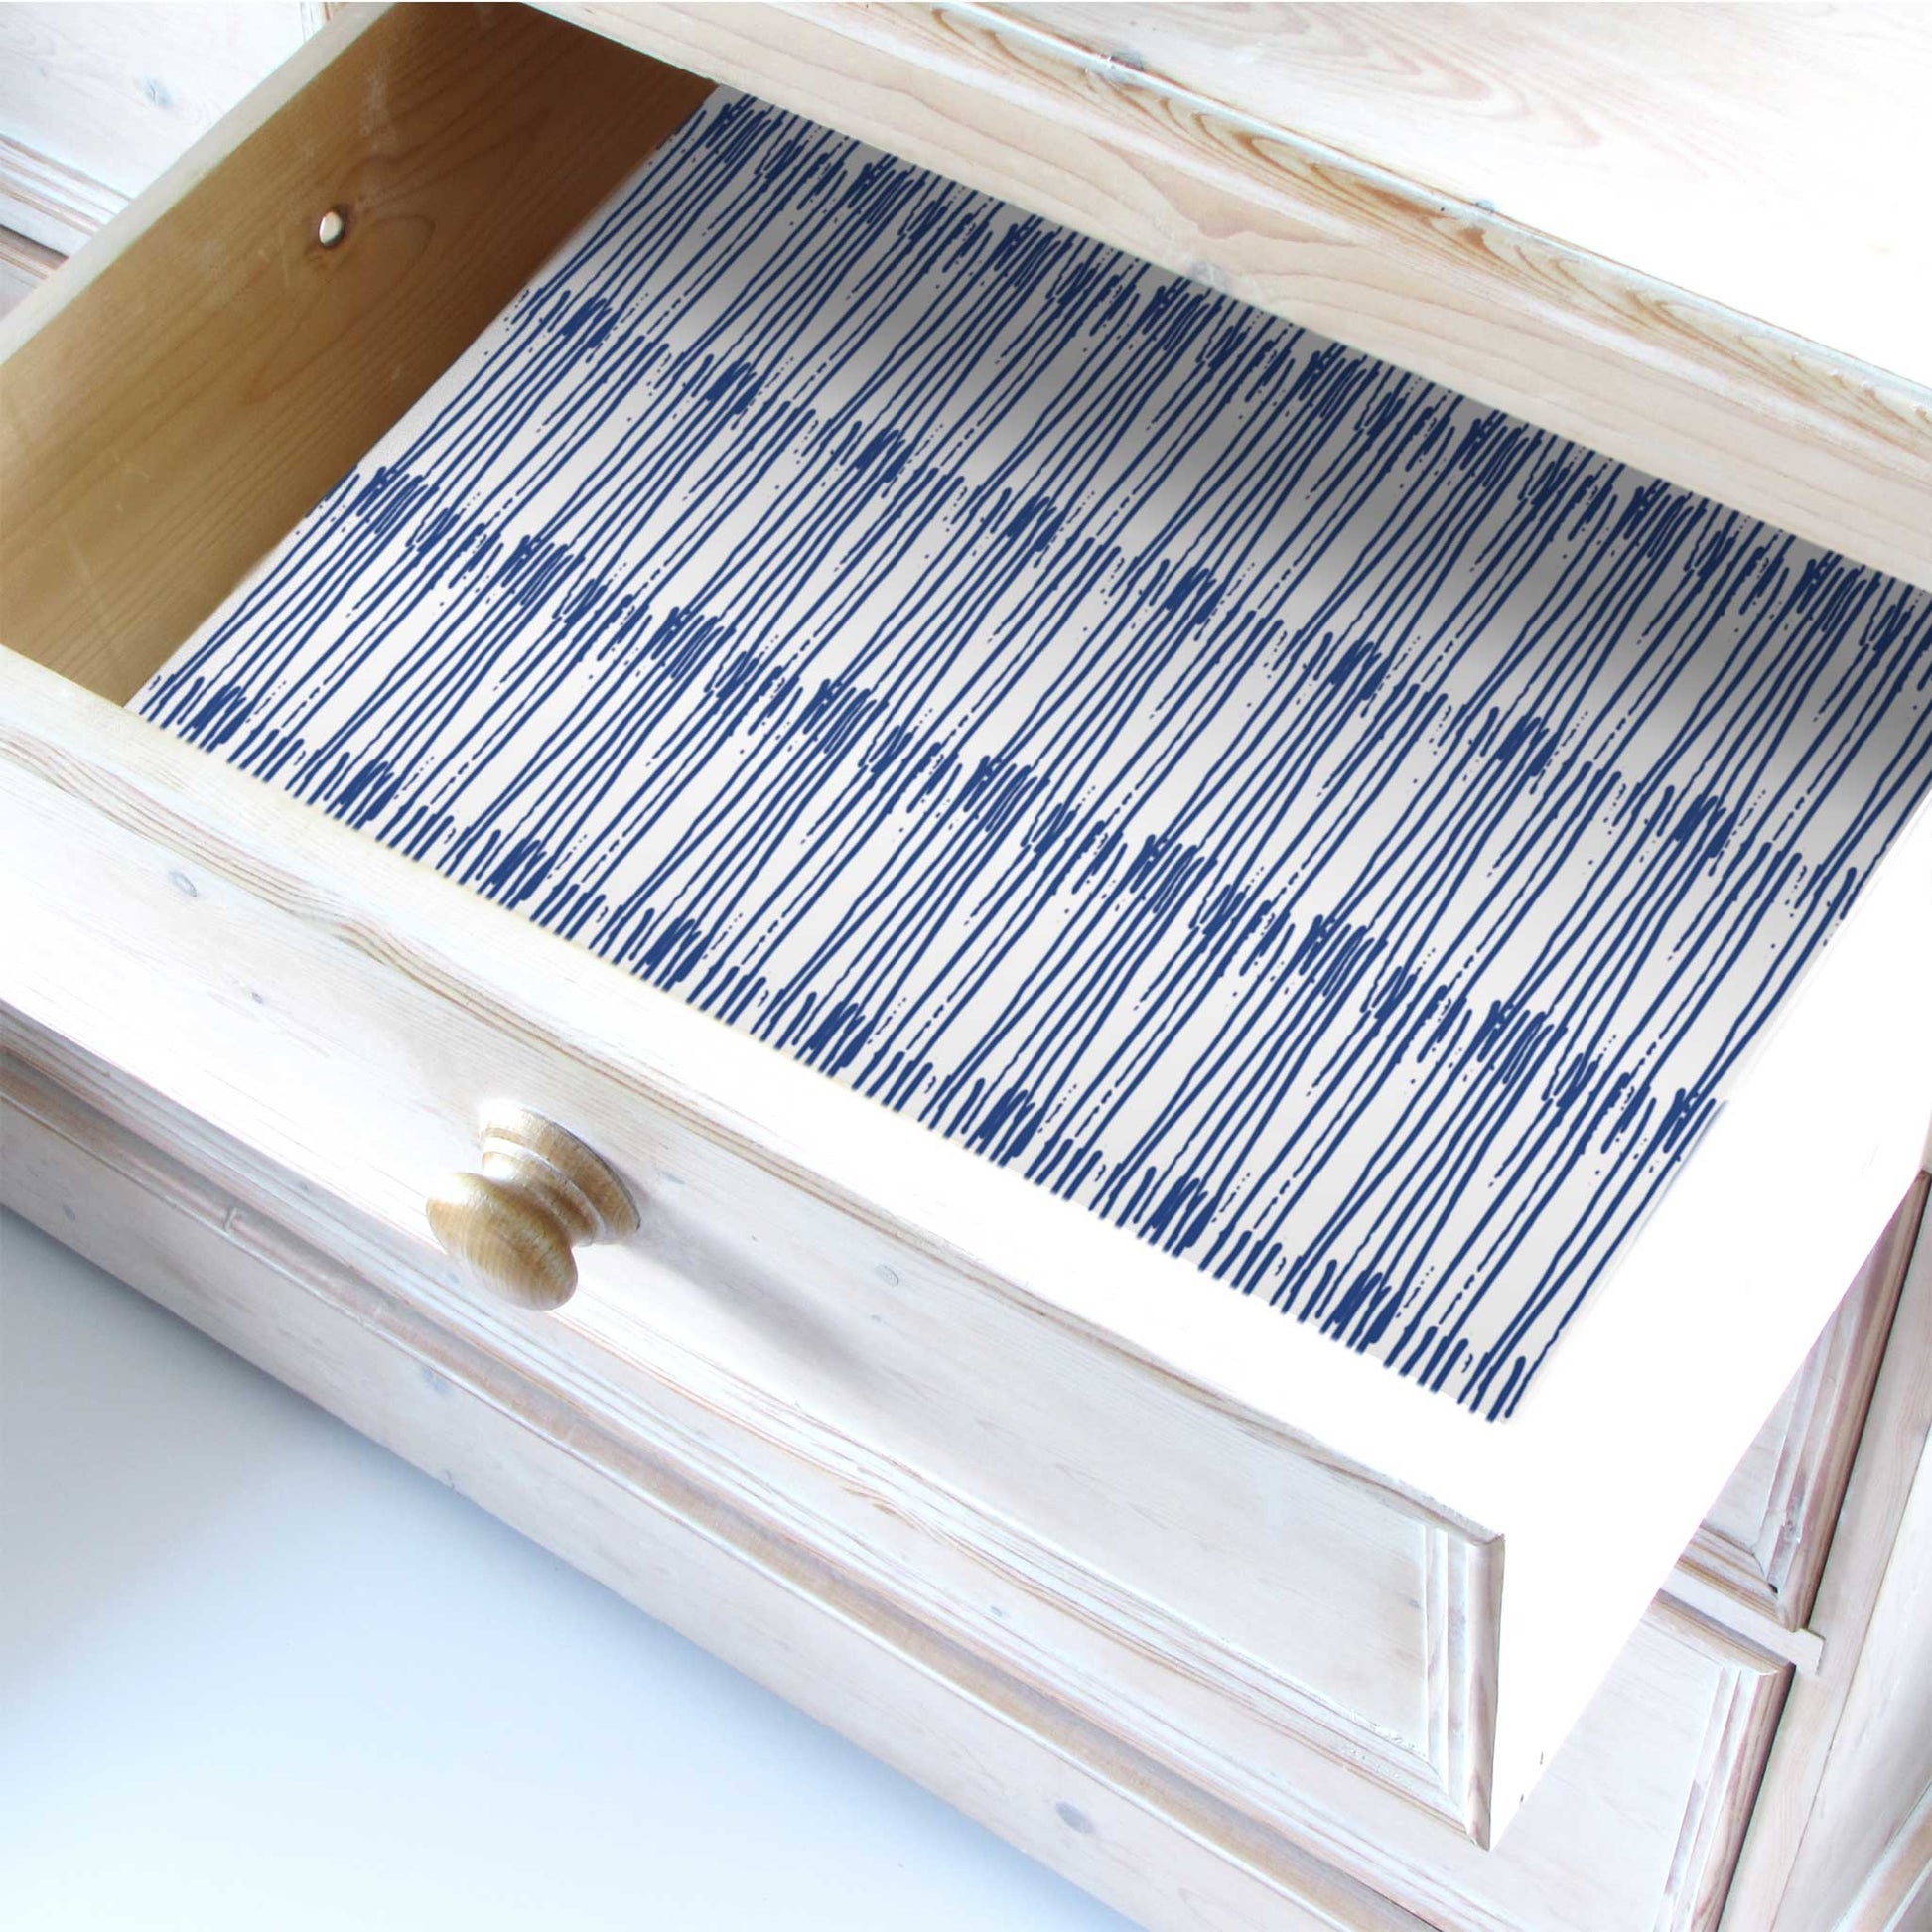 Simply Drawer Liners LAVENDER & NEEM OIL Scented Drawer Liners in a Japanese Pen Design | Natural ANTI-MOTH Repellent. Made in Britain.